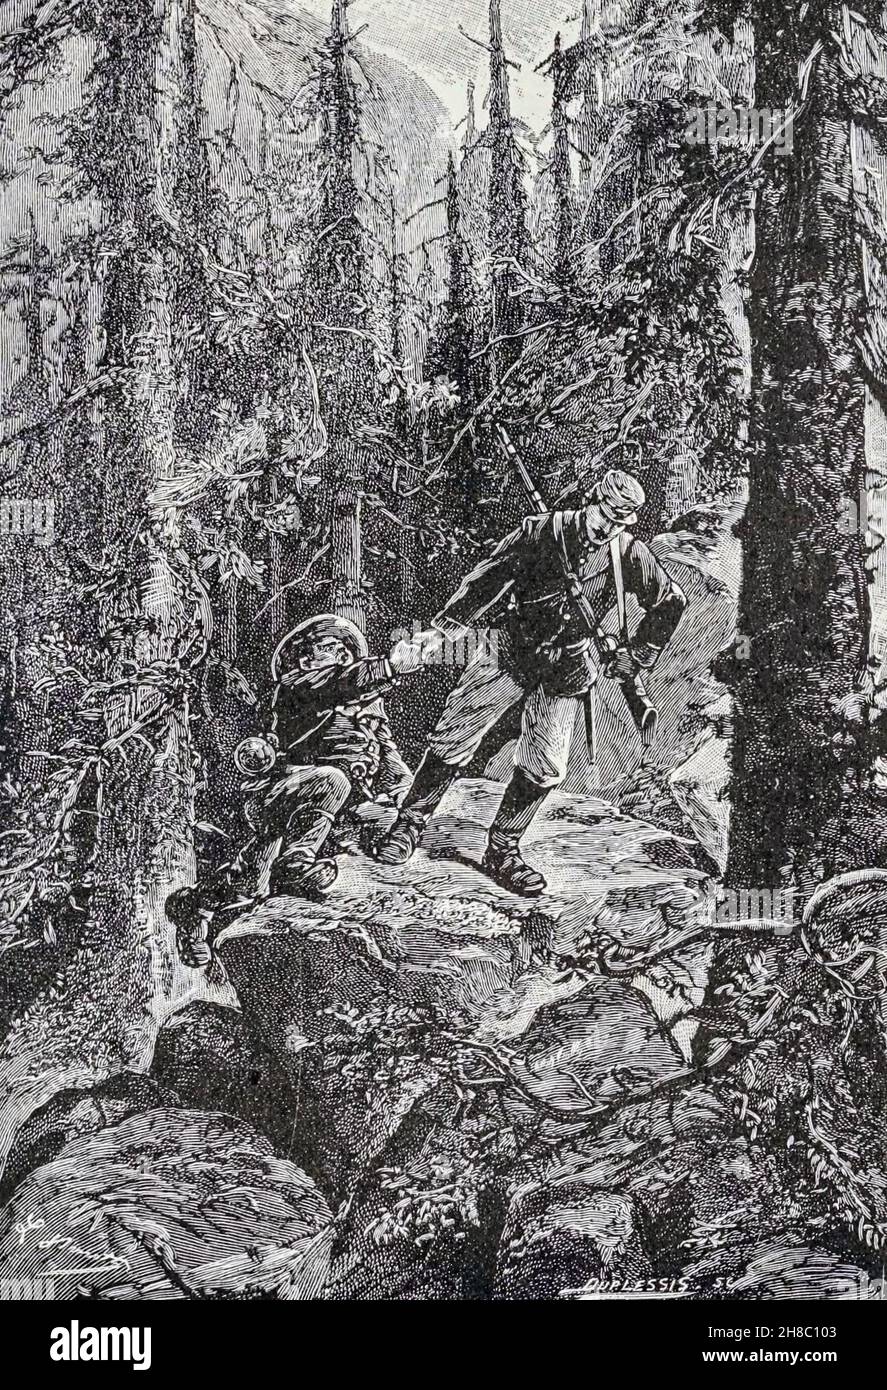 To help over rocks too high for his little legs from ' The Carpathian Castle ' (or The castle of the Carpathians) by Jules, Verne, 1828-1905. May have been the inspiration for Dracula, Published in New York, by Merriam in 1894 In the village of Werst in the Carpathian mountains of Transylvania, some mysterious things are occurring and the villagers believe that Chort (the devil) occupies the castle. A visitor to the region, Count Franz de Telek, is intrigued by the stories and decides to go to the castle and investigate. He finds that the owner of the castle is Baron Rodolphe de Gortz, with wh Stock Photo